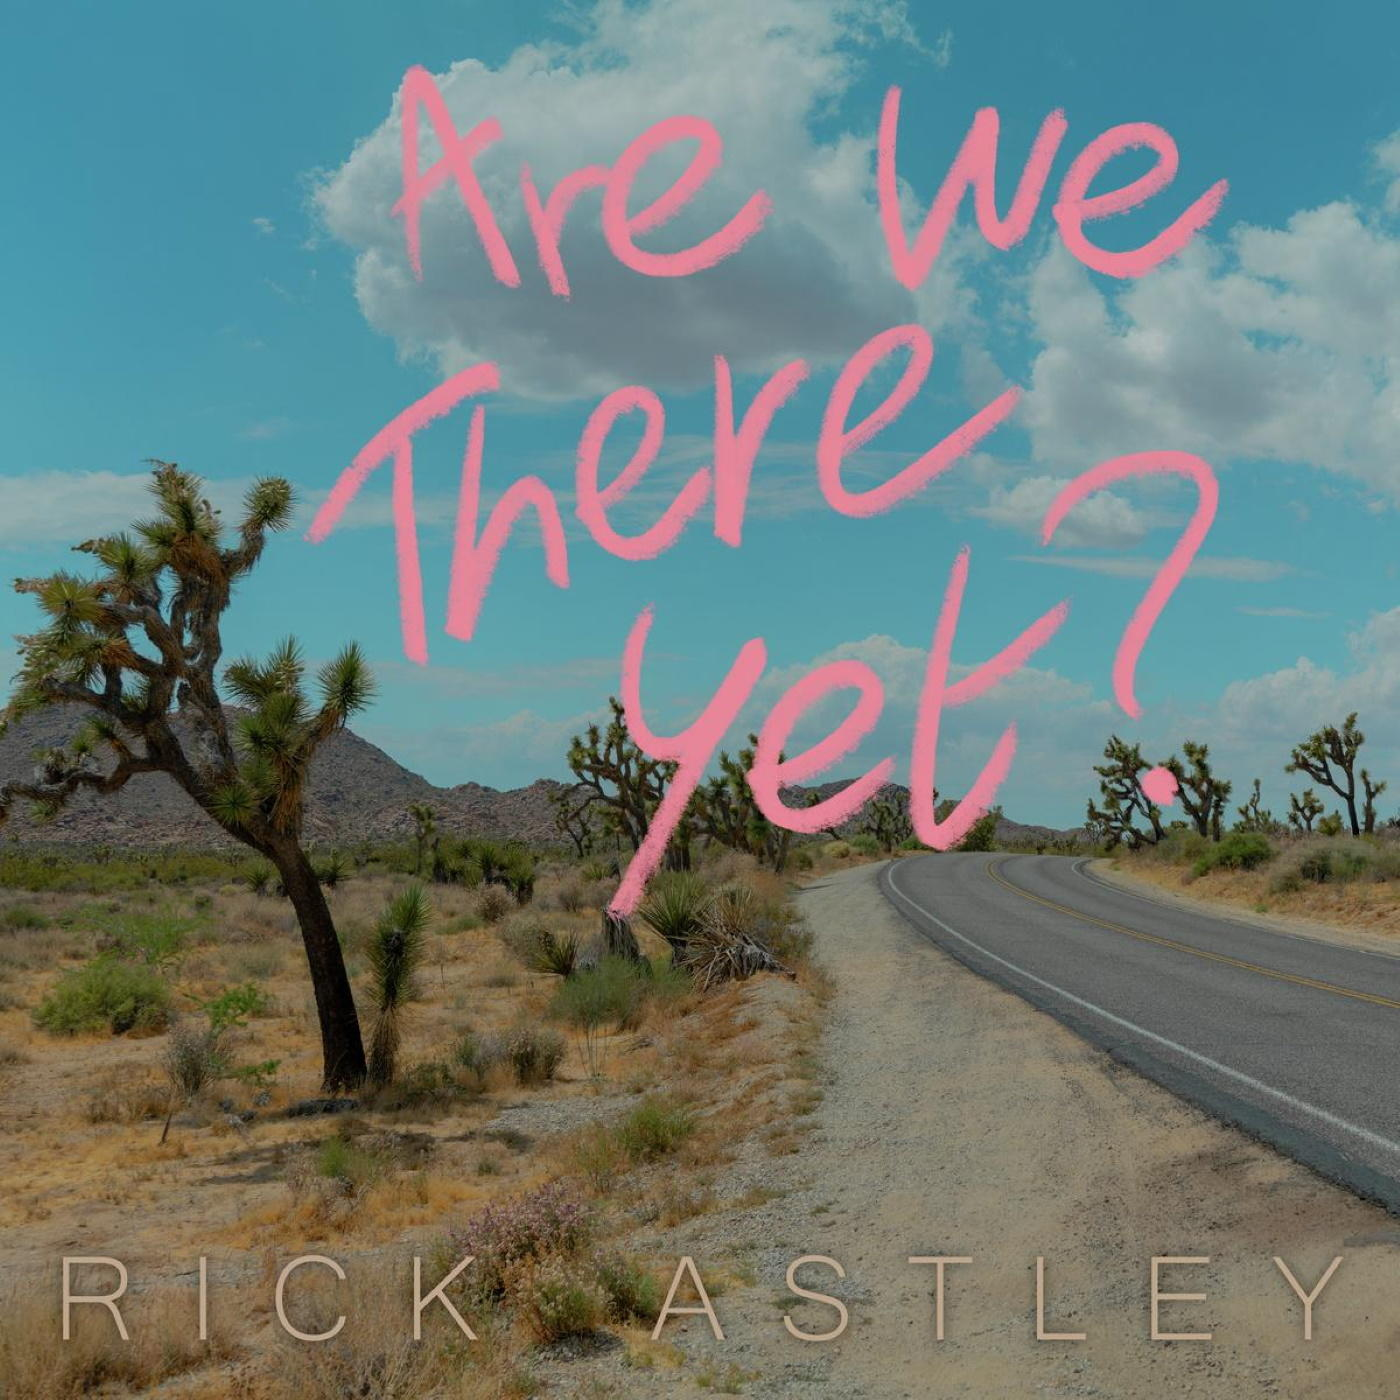 There Rick We - Yet?(Ltd.Edition Astley Vinyl) Clear Are (Vinyl) -